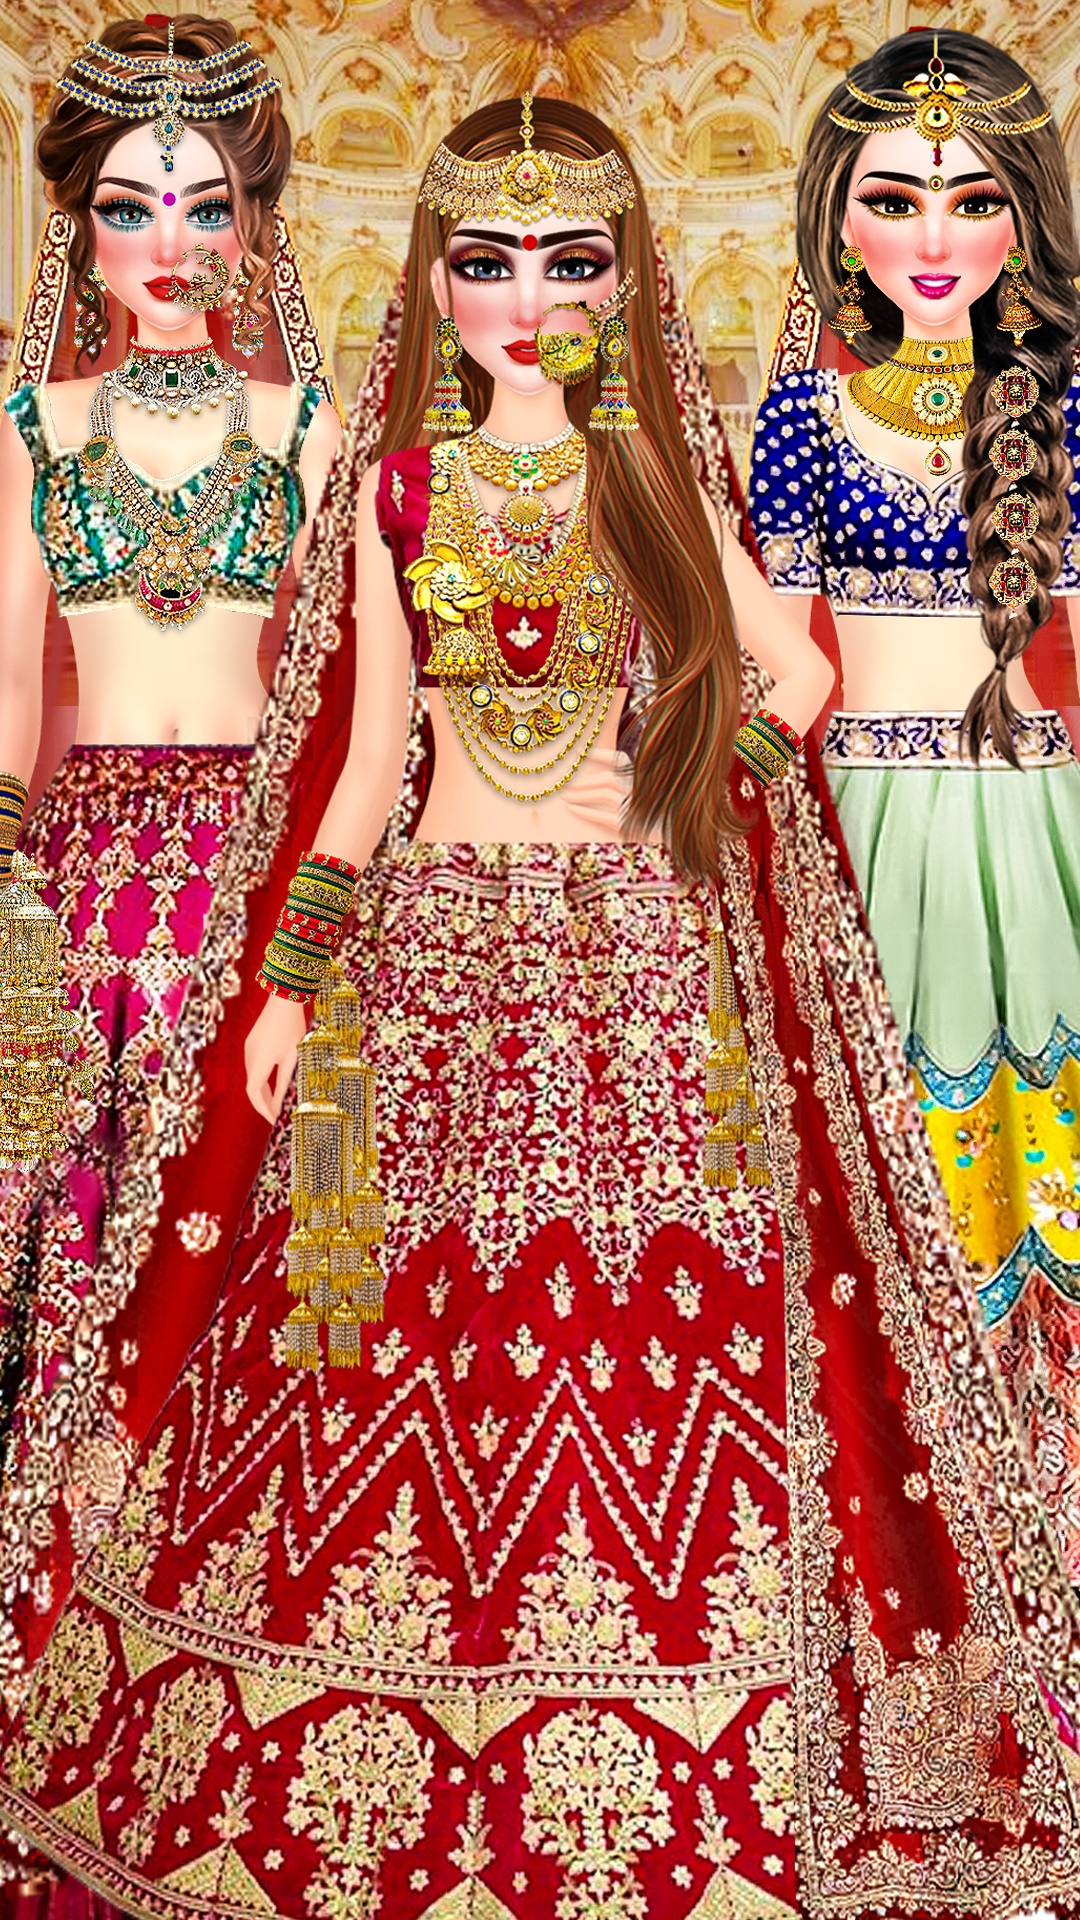 Indian Wedding Dressup Game||Fashion Show Competition Game||Android  gameplay||@kidsgamejunction - YouTube